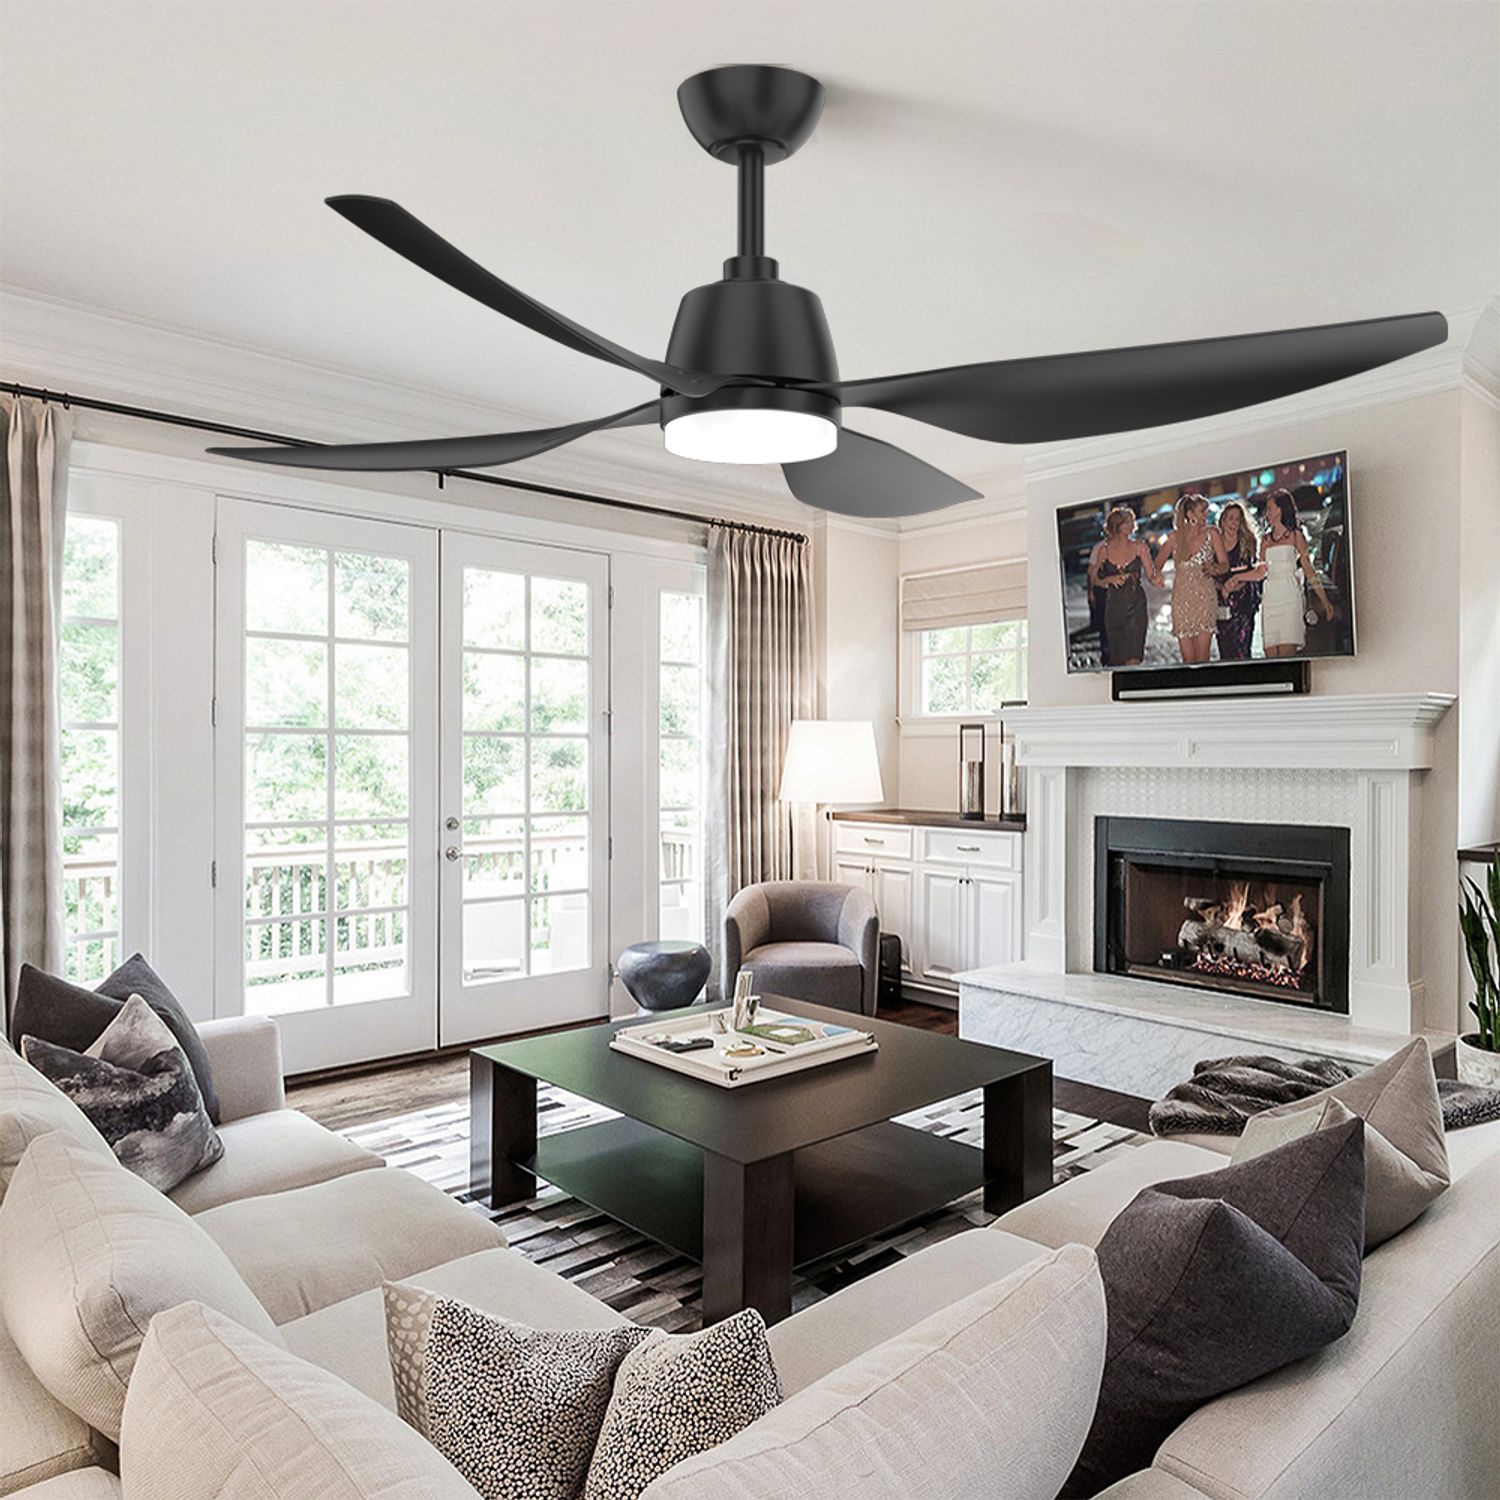 KBS Wholesale four blade ceiling fan with less noise in a living room